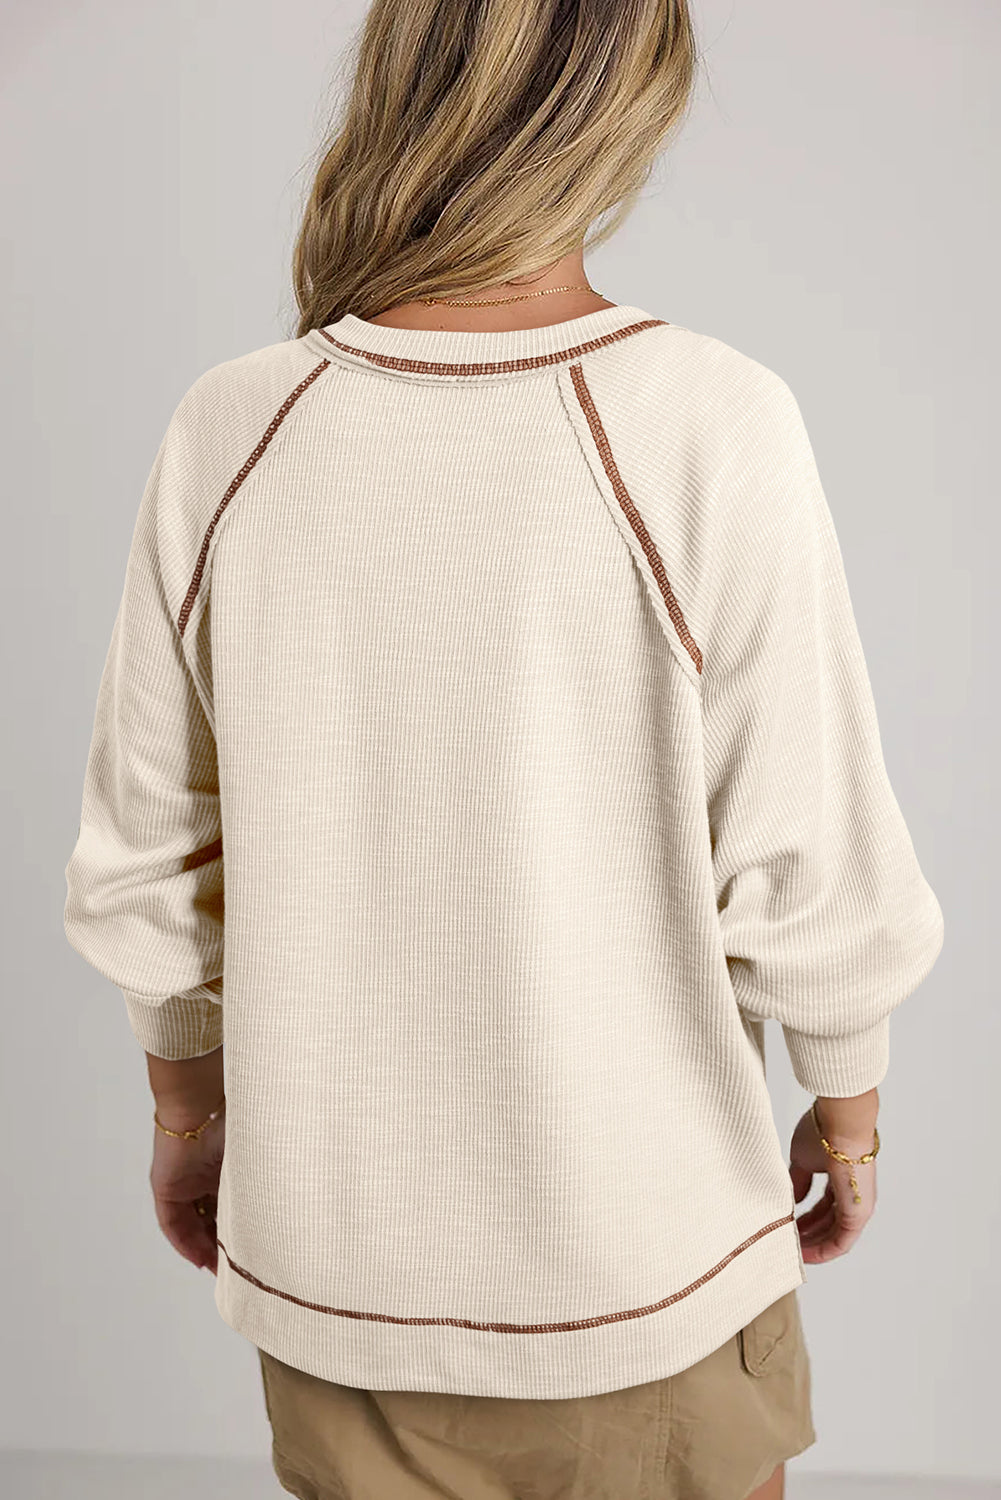 Beige Exposed Seam Textured Knit V Neck Pullover Top